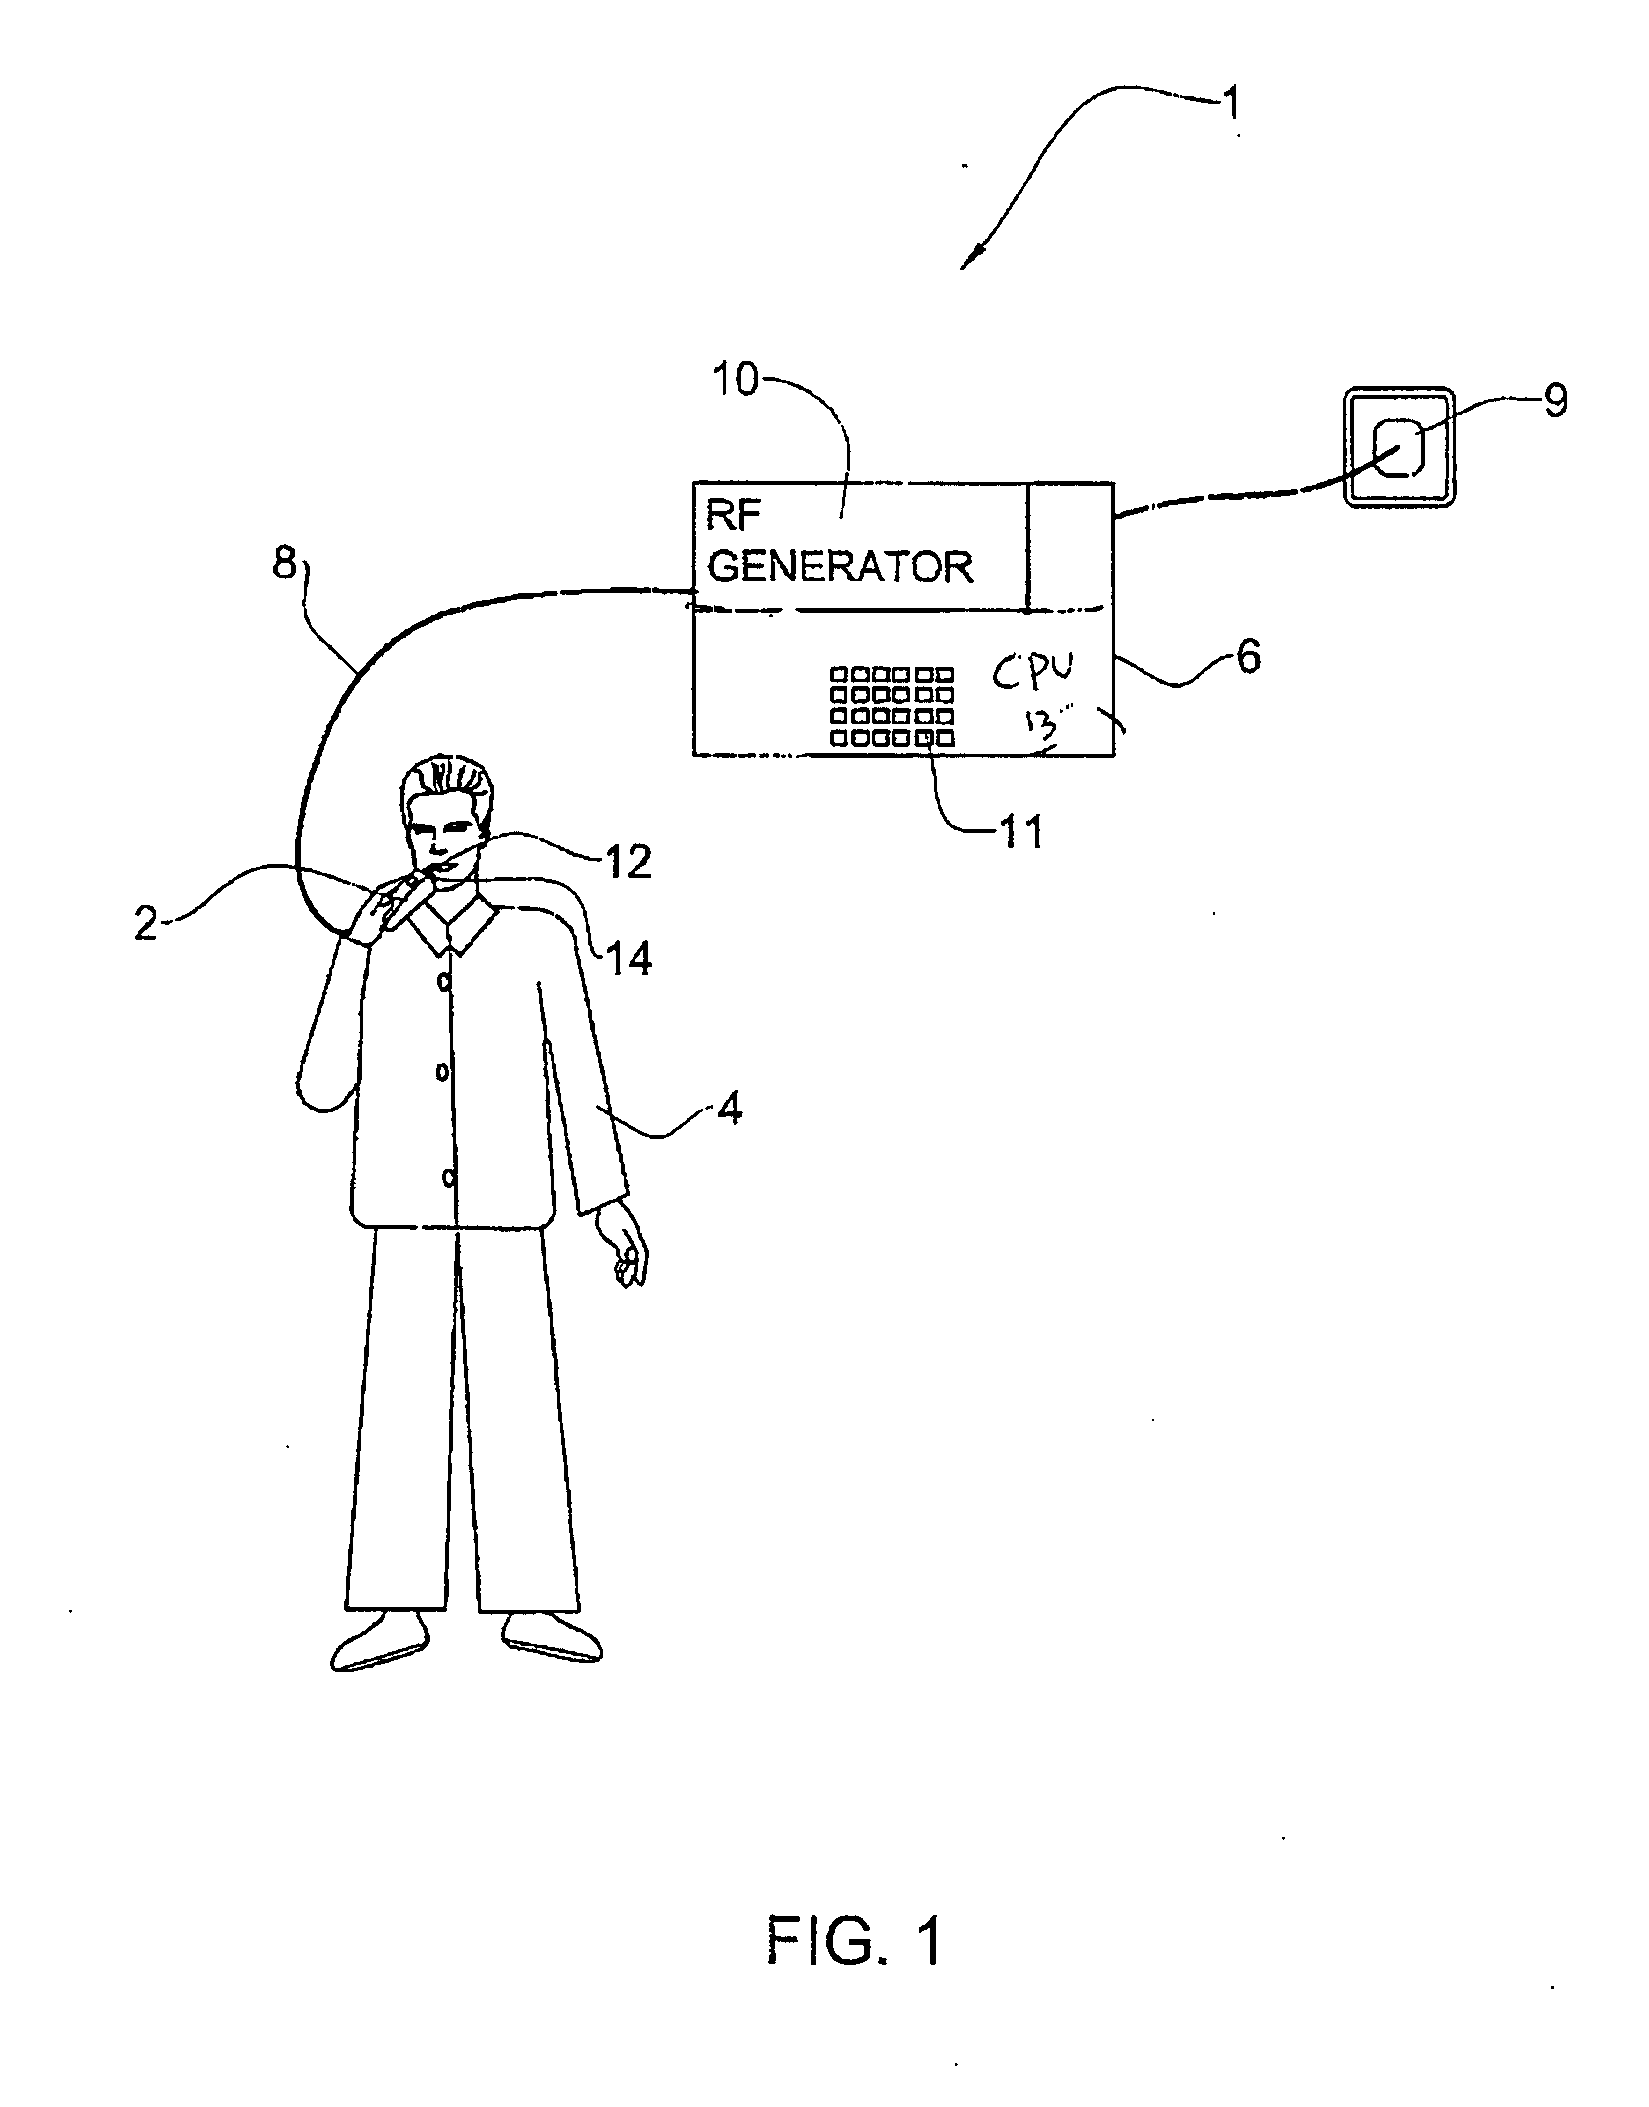 Device and method for treating skin with temperature control